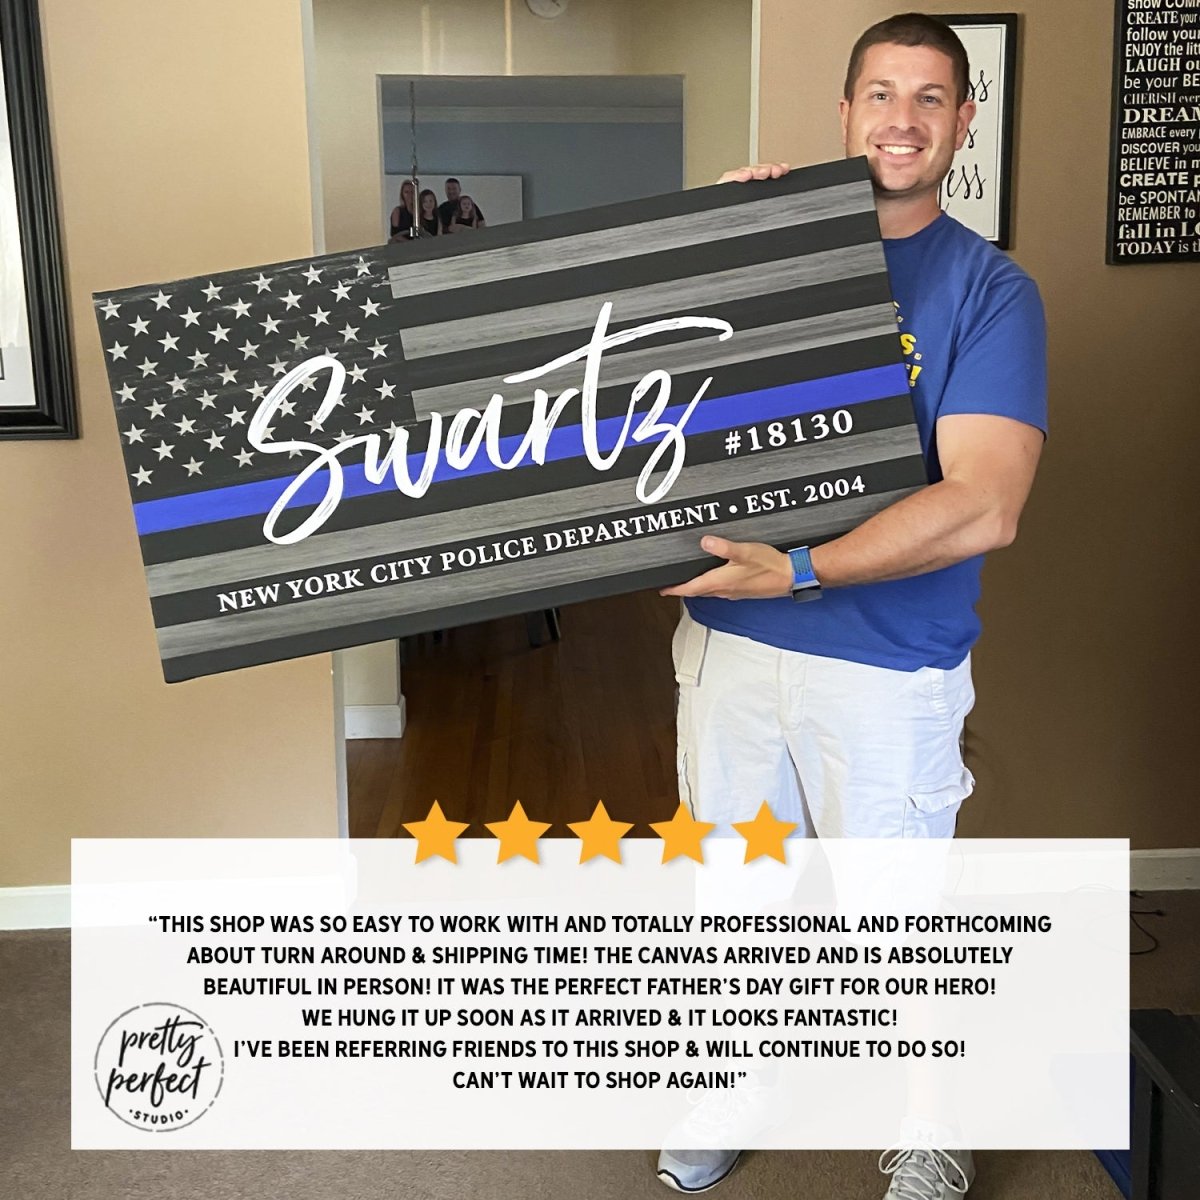 Customer product review for personalized blue line police officer name sign by Pretty Perfect Studio